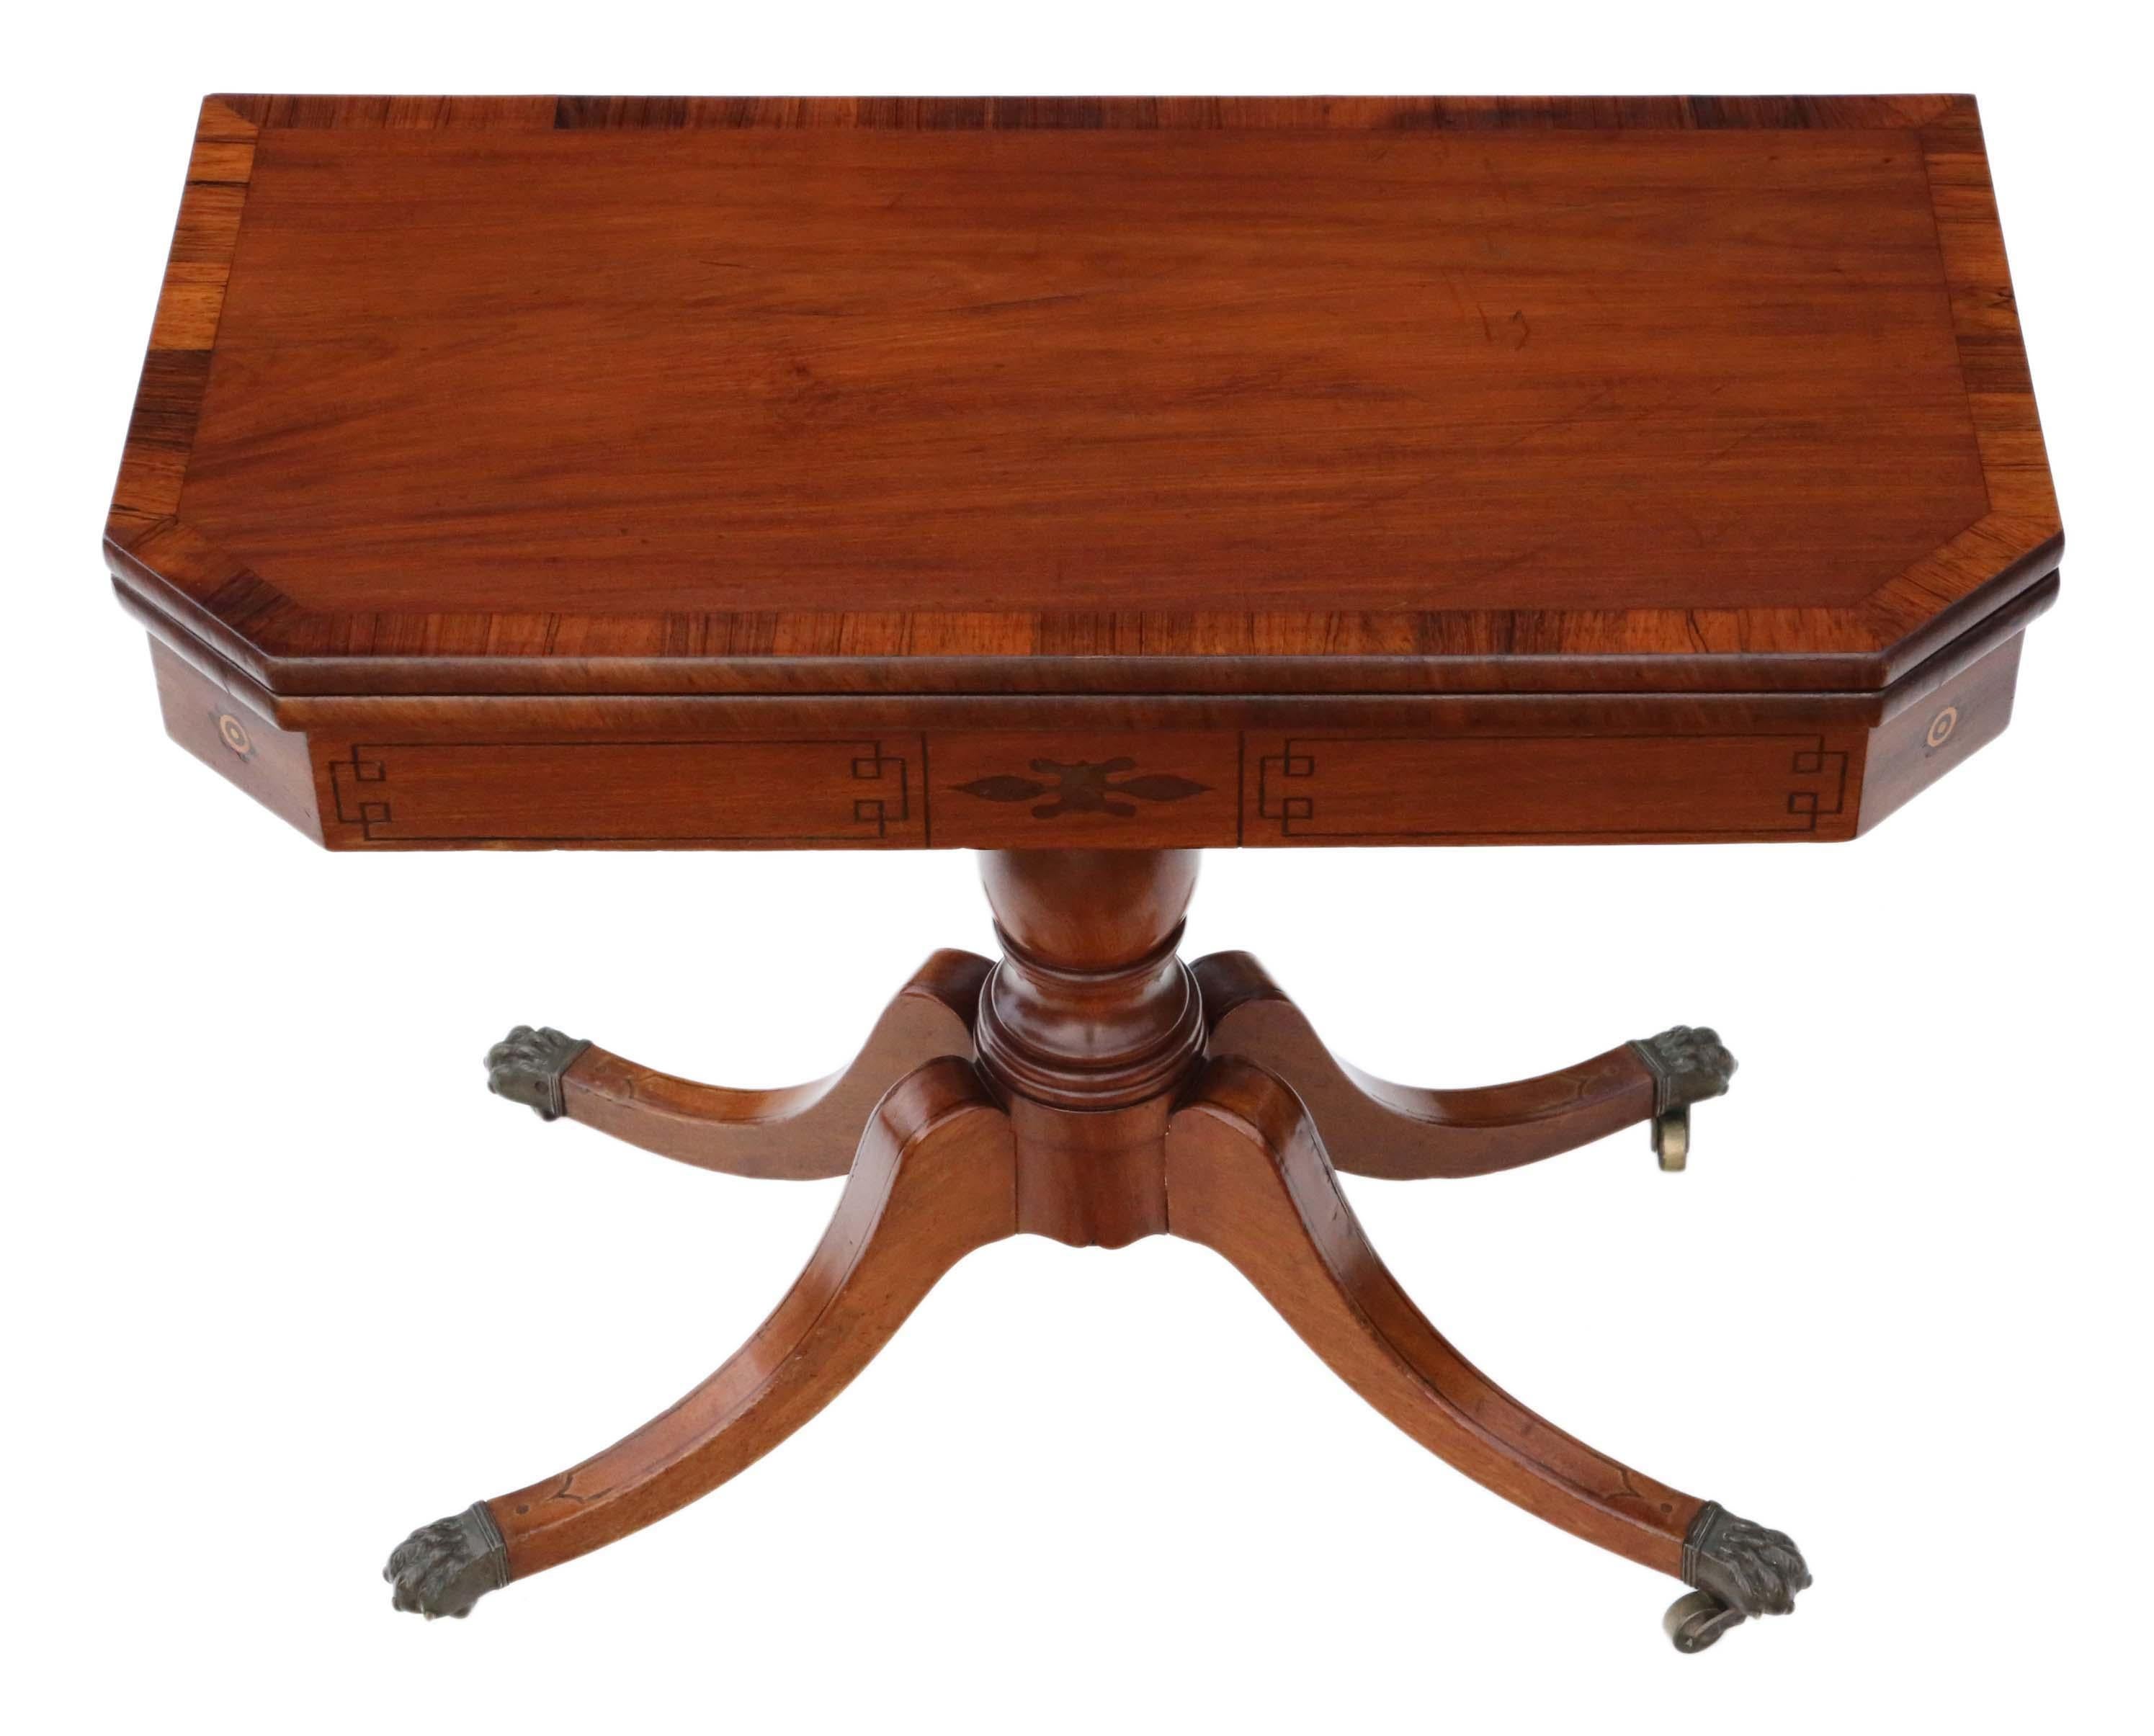 Antique Georgian circa 1810 mahogany folding tea table, that would also make a charming card or console table.

This is a lovely table, that is full of age, charm and character. Stands on attractive brass castors.

No loose joints and the finishes